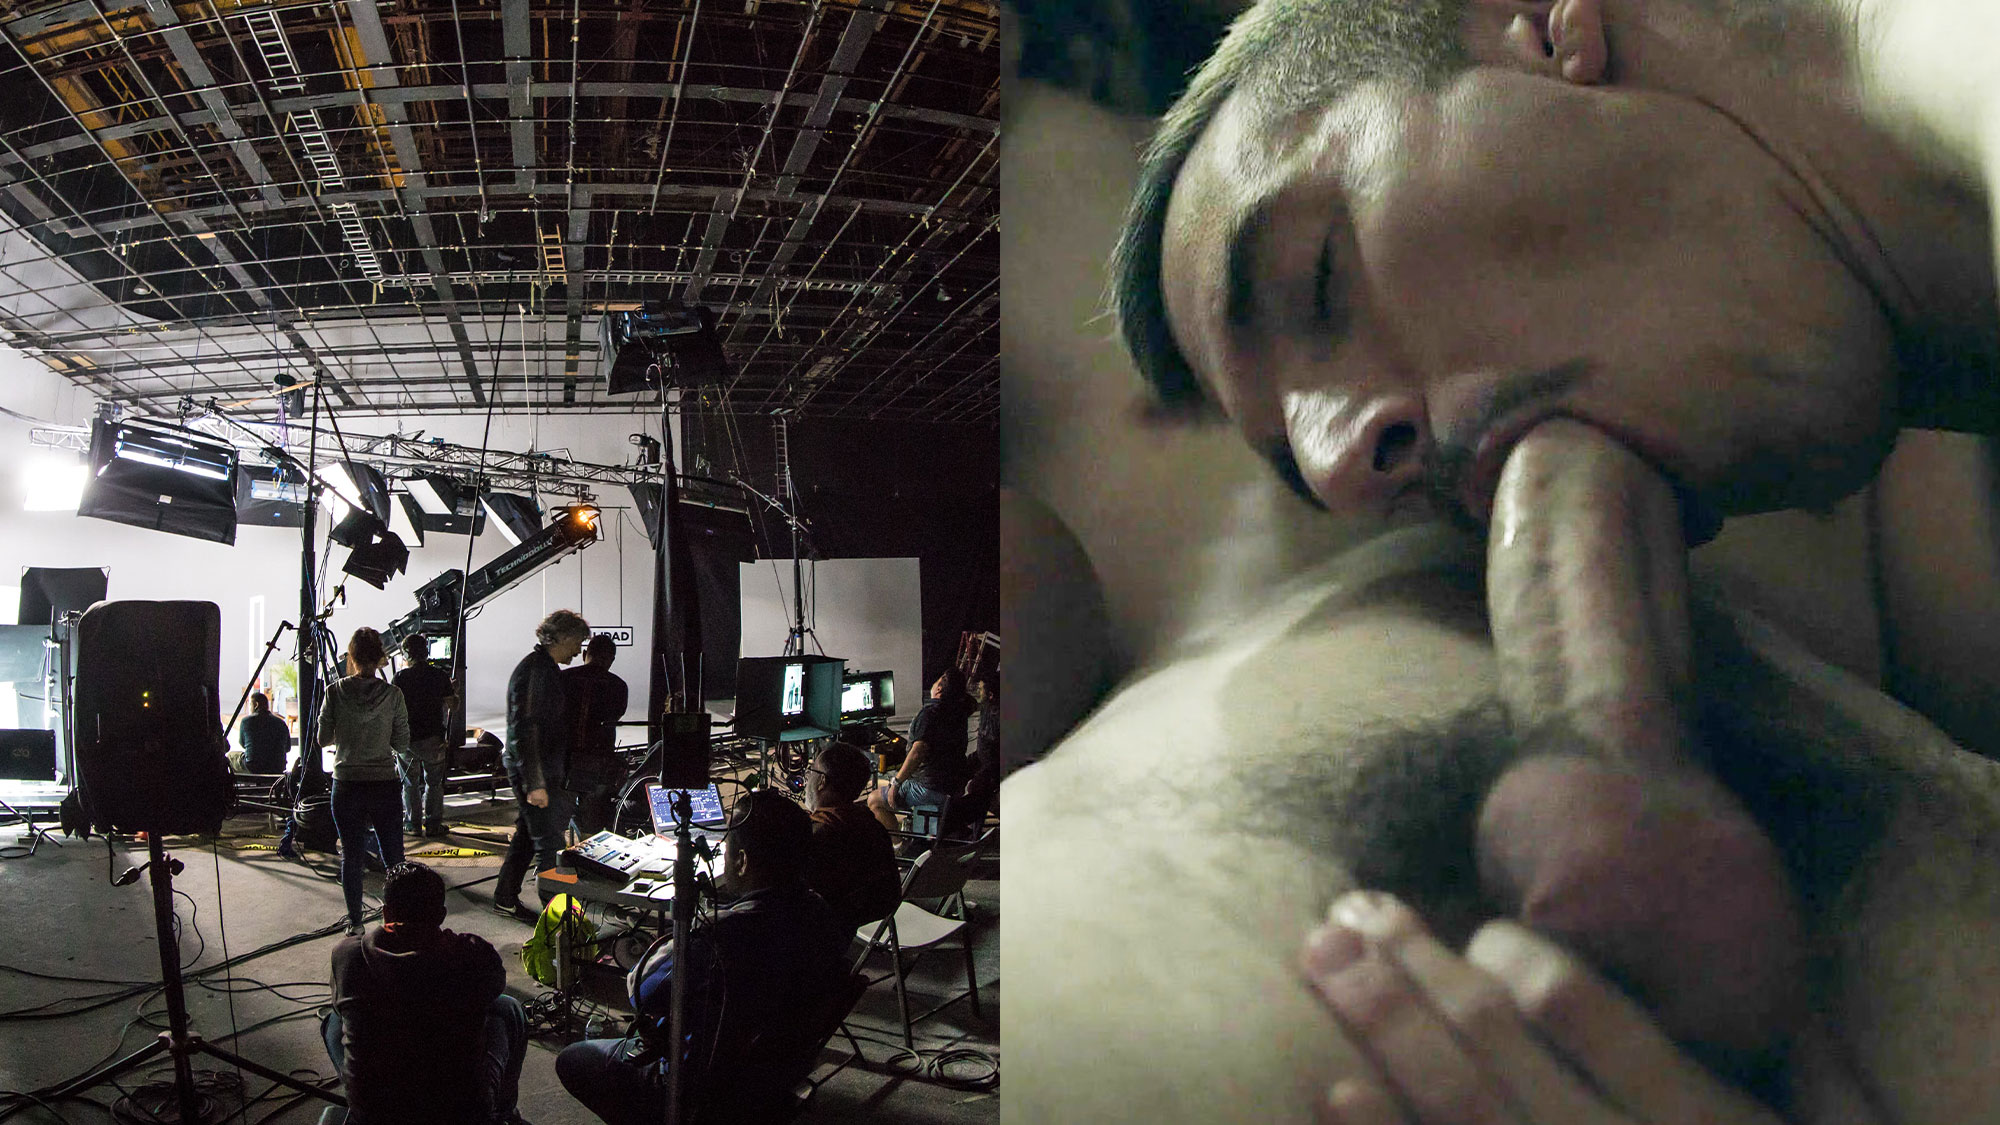 Real gay sex scenes from mainstream movies and tv shows